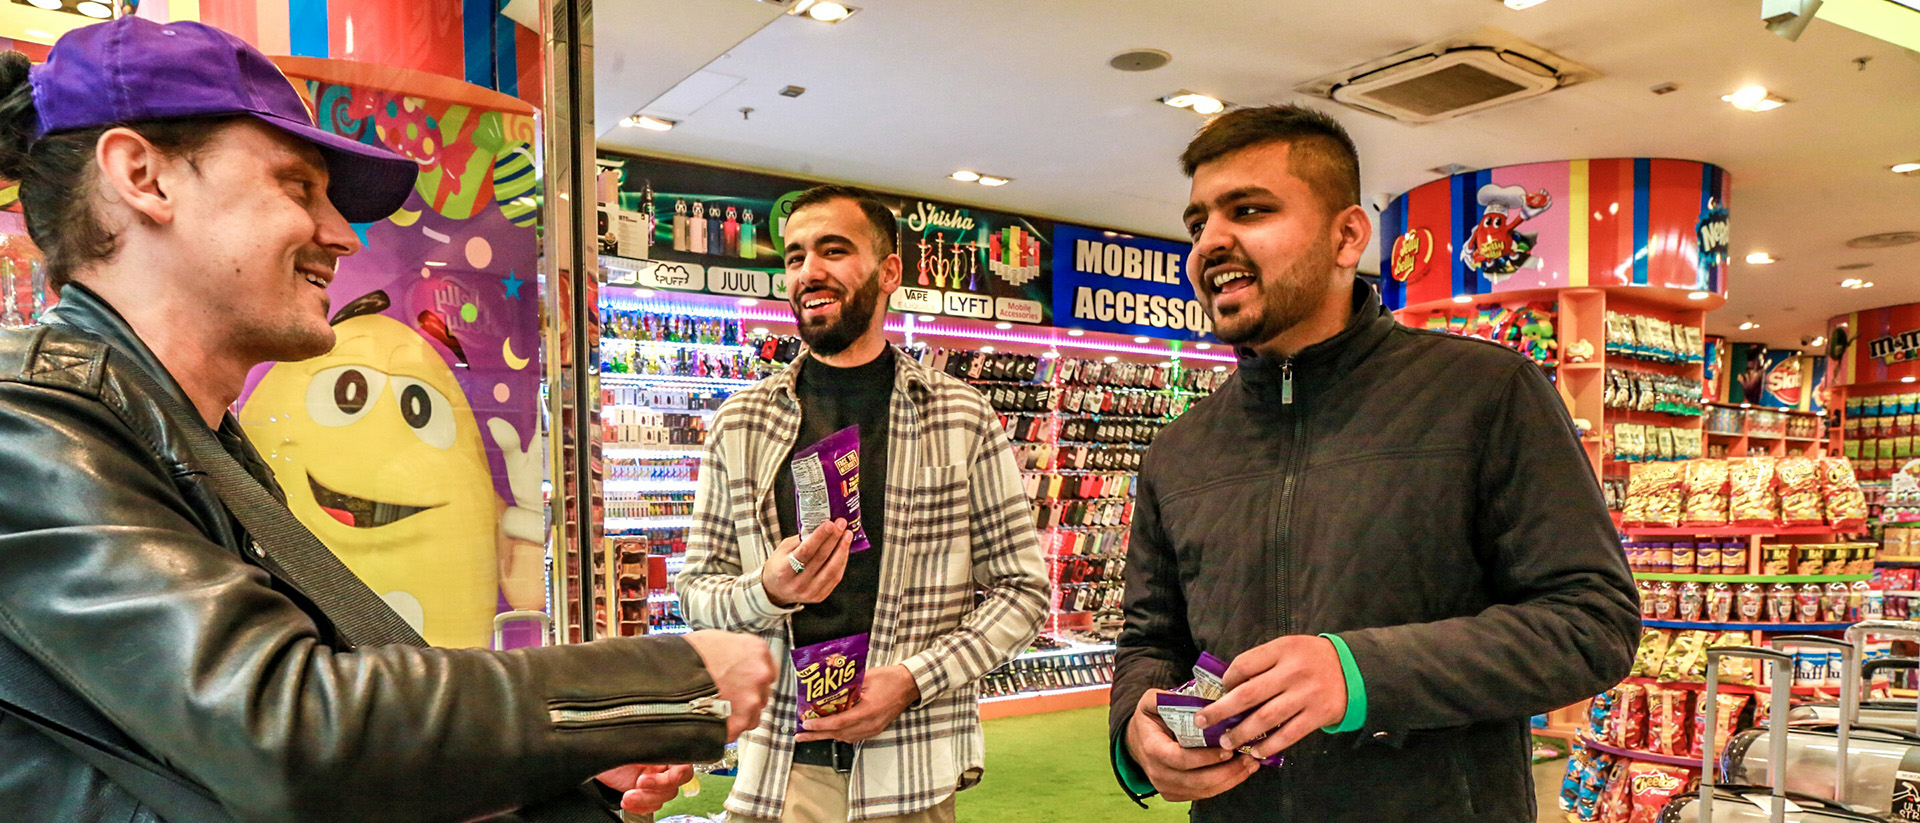 Takis promotional staff handing two two samples